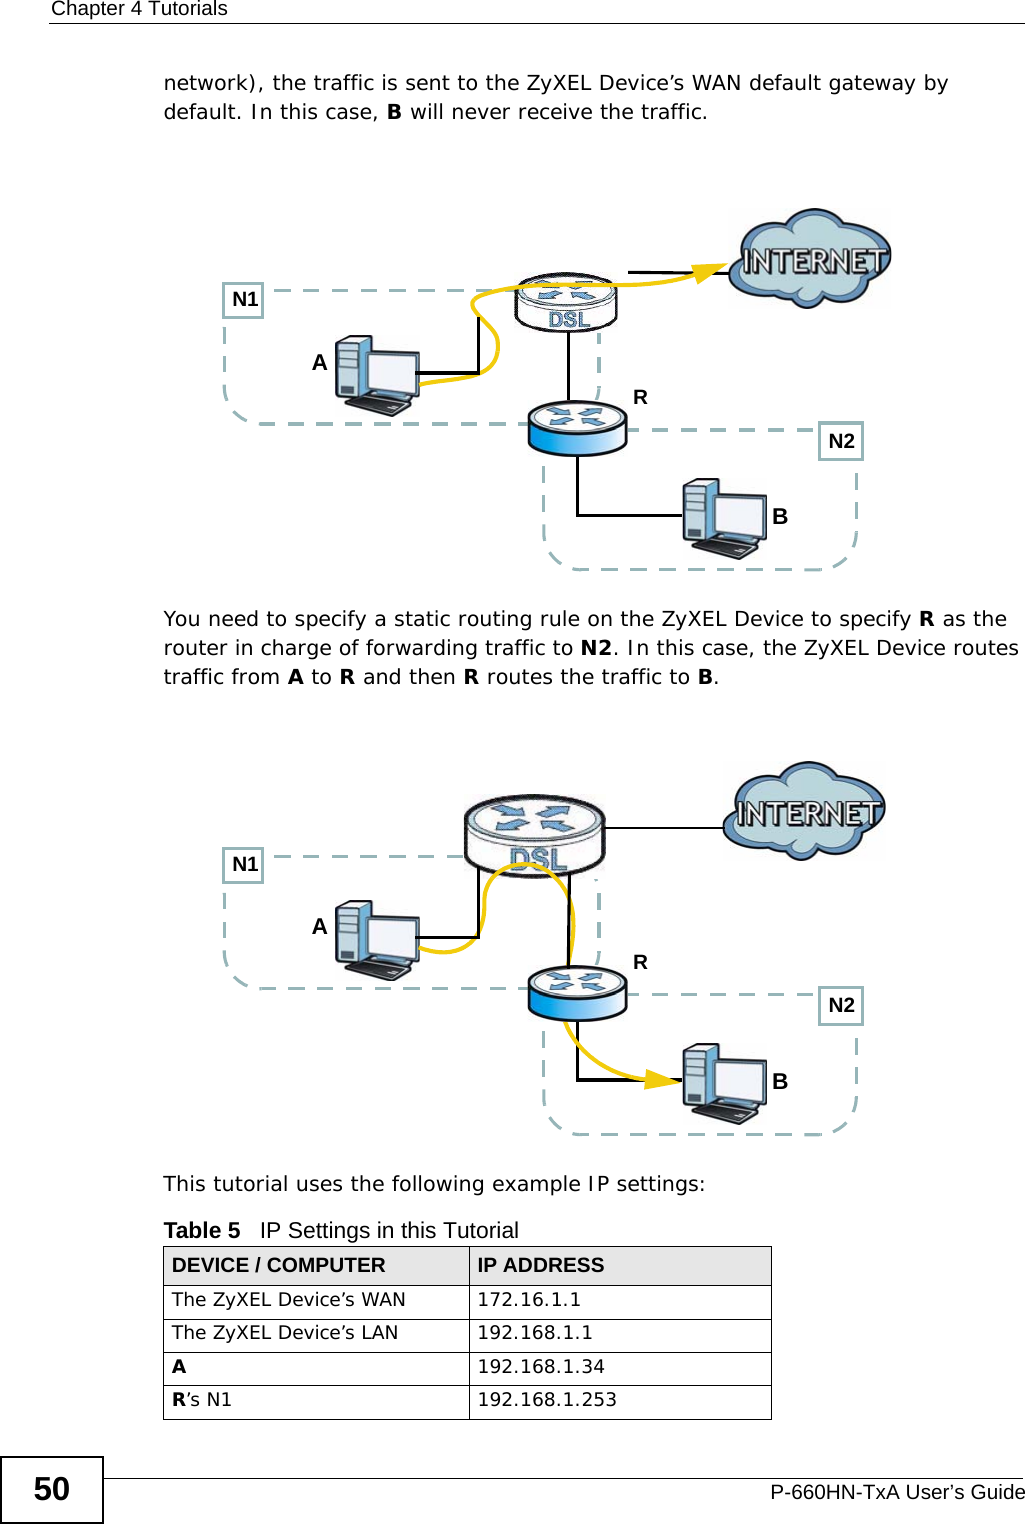 Chapter 4 TutorialsP-660HN-TxA User’s Guide50network), the traffic is sent to the ZyXEL Device’s WAN default gateway by default. In this case, B will never receive the traffic.You need to specify a static routing rule on the ZyXEL Device to specify R as the router in charge of forwarding traffic to N2. In this case, the ZyXEL Device routes traffic from A to R and then R routes the traffic to B.This tutorial uses the following example IP settings:Table 5   IP Settings in this TutorialDEVICE / COMPUTER IP ADDRESSThe ZyXEL Device’s WAN 172.16.1.1The ZyXEL Device’s LAN 192.168.1.1A192.168.1.34R’s N1  192.168.1.253N2BN1ARN2BN1AR